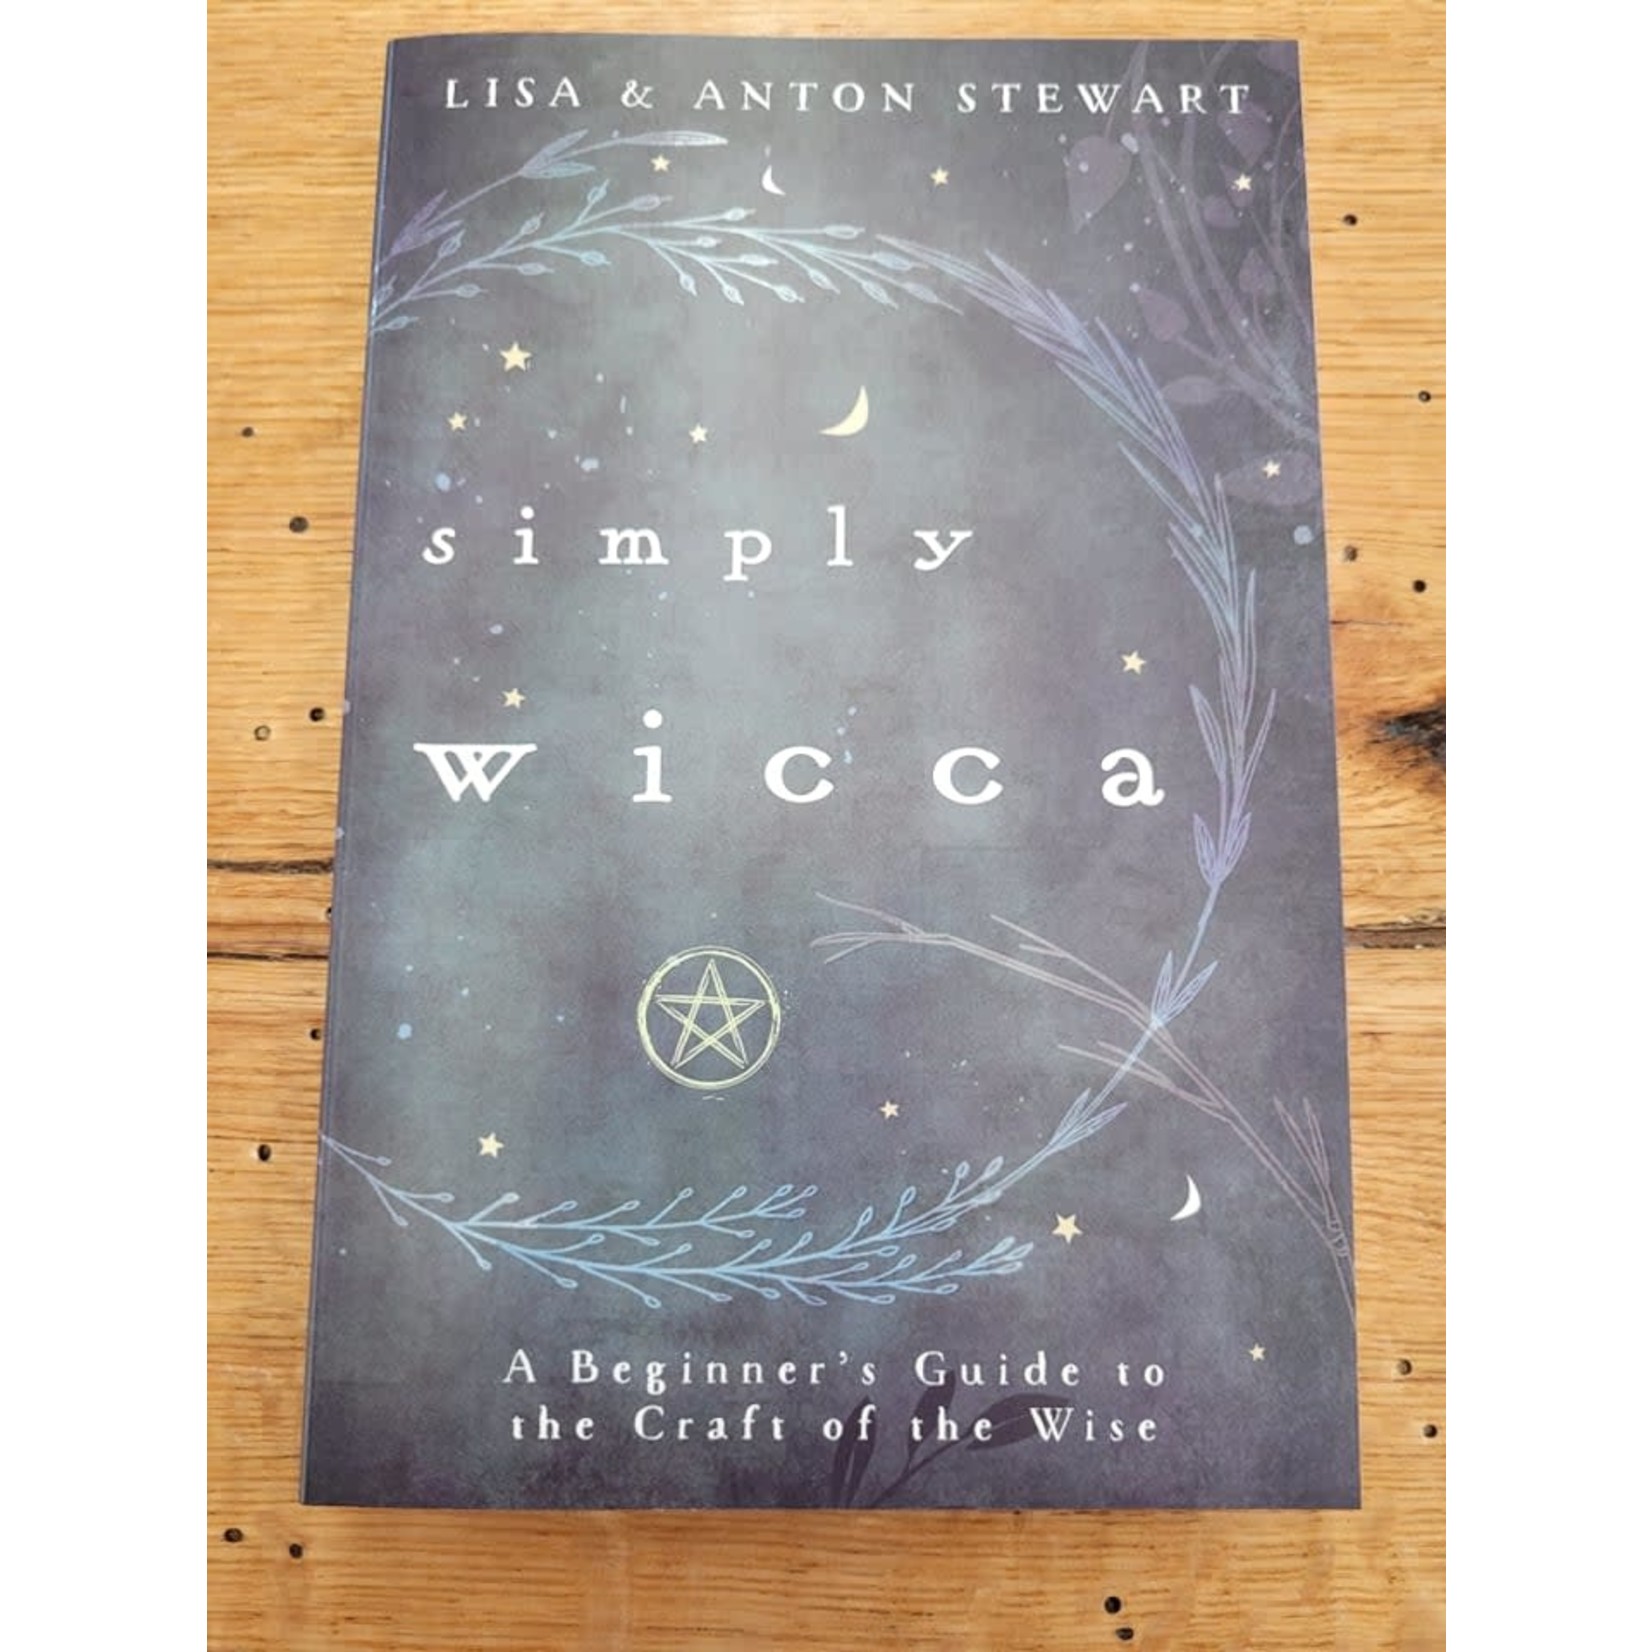 Simply Wicca